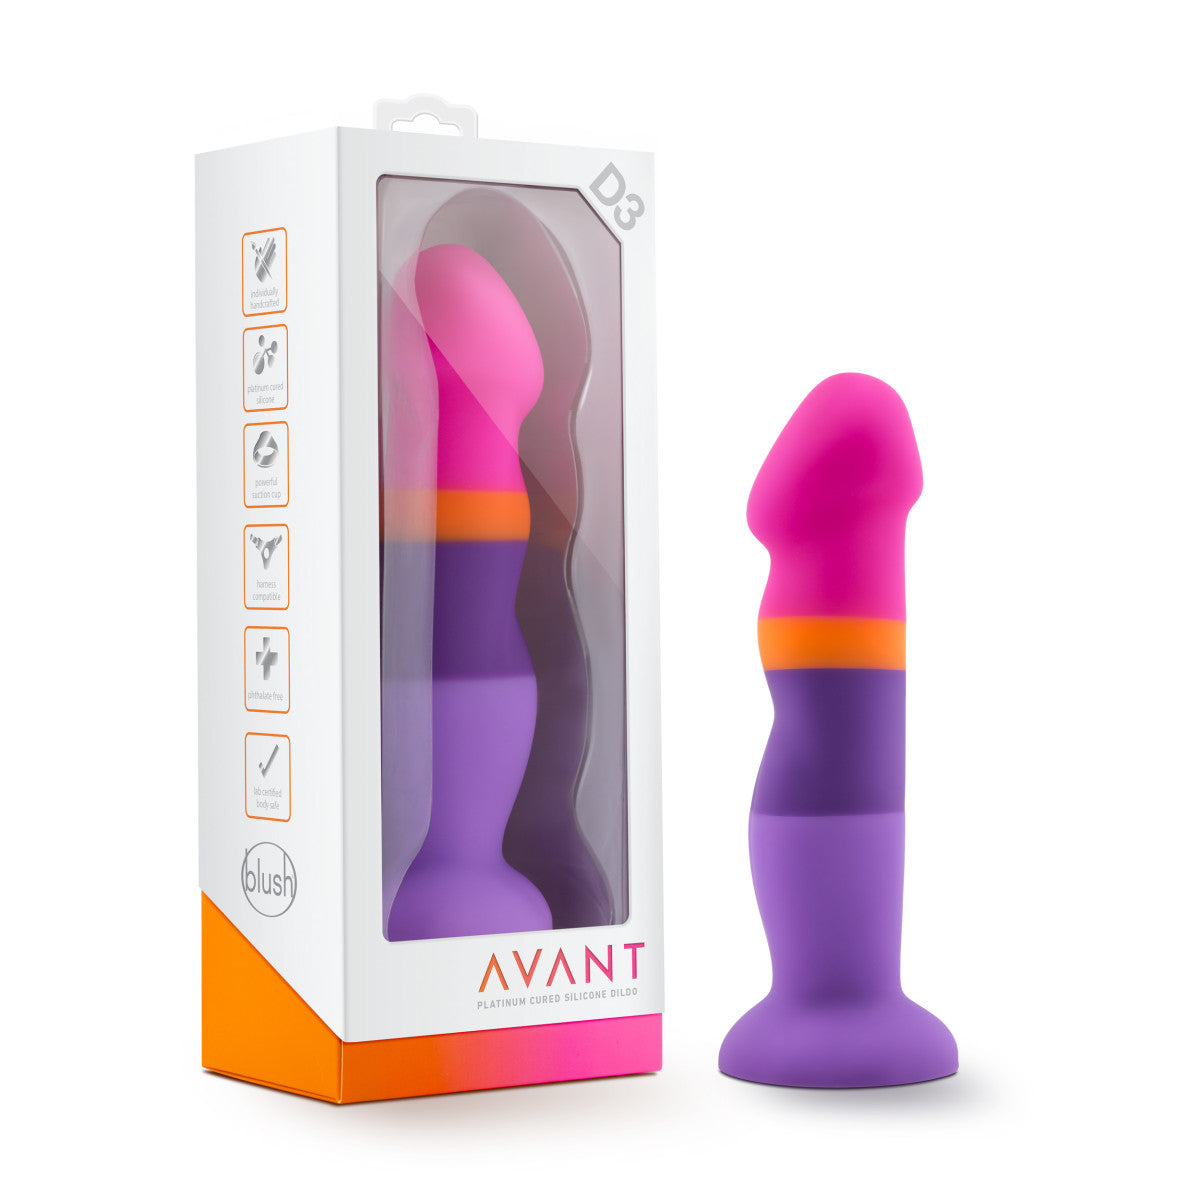 Blush Avant | Summer Fling D3: Artisan 8 Inch Curved G-Spot Dildo with Suction Cup Base - Elegantly Made with Smooth Ultrasilk® Purio™ Silicone